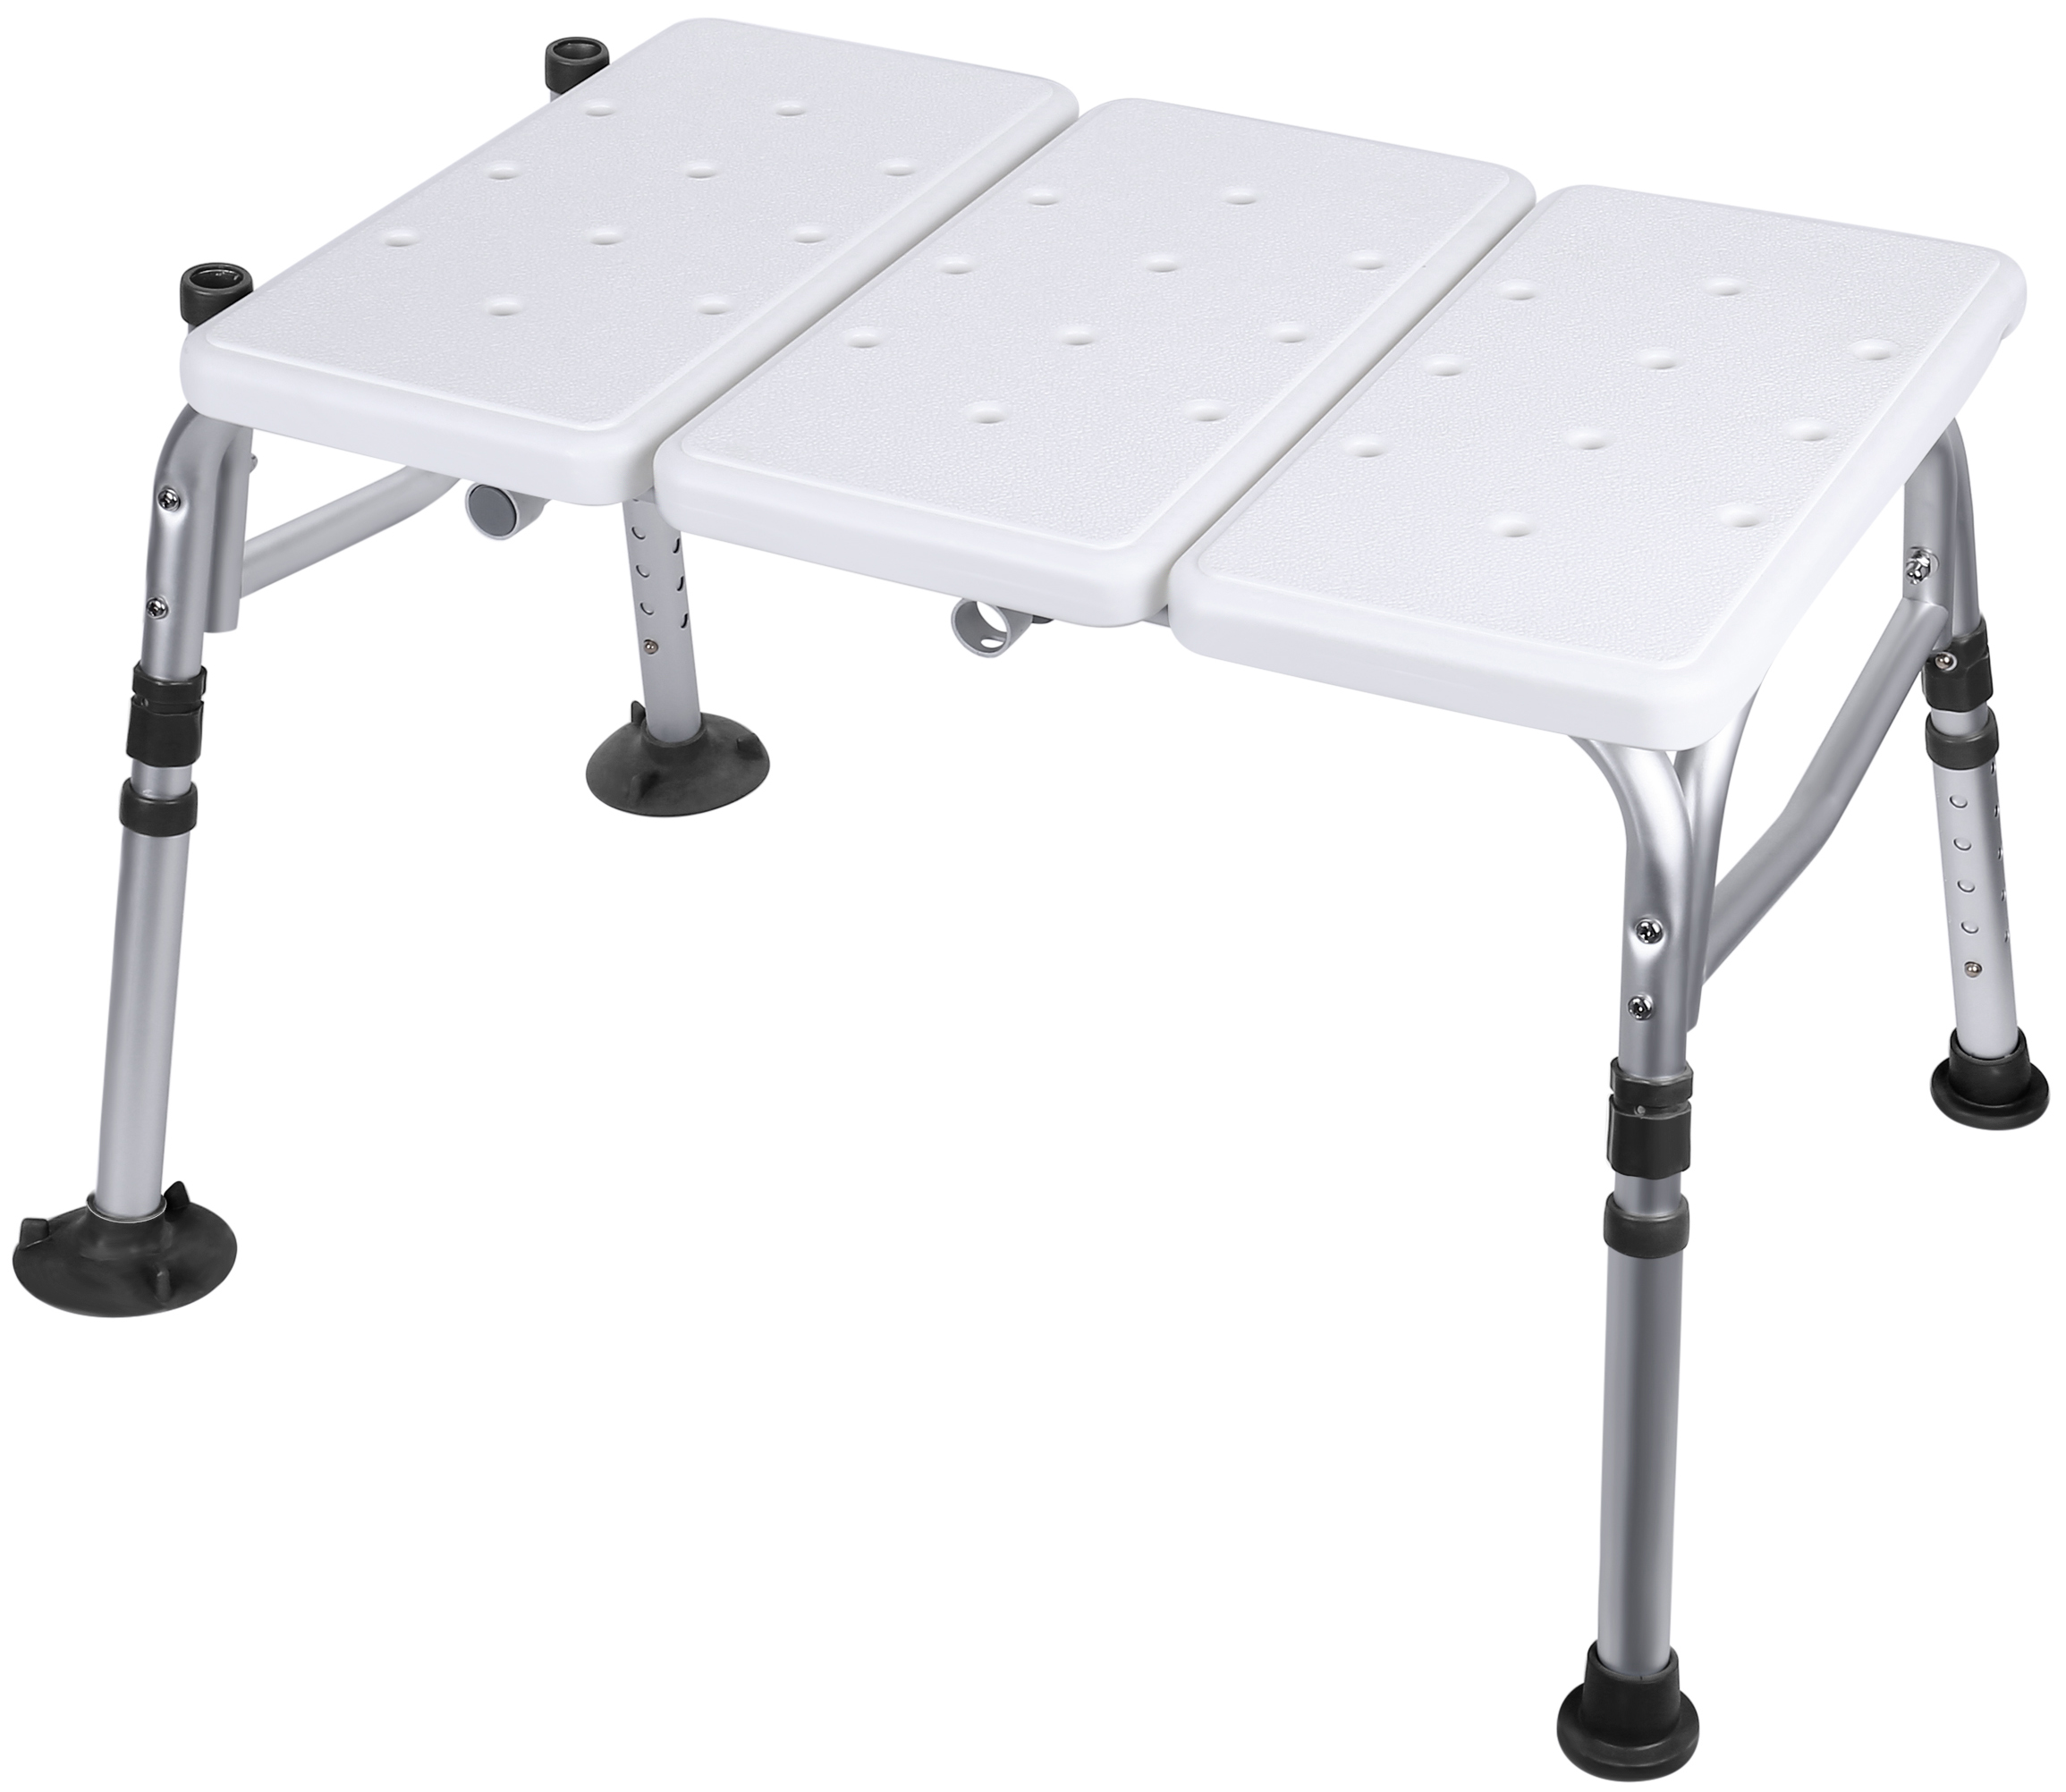 Everyday Essentials Adjustable Height Bath Shower Tub Bench Chair with Adjustable Backrest - image 5 of 5